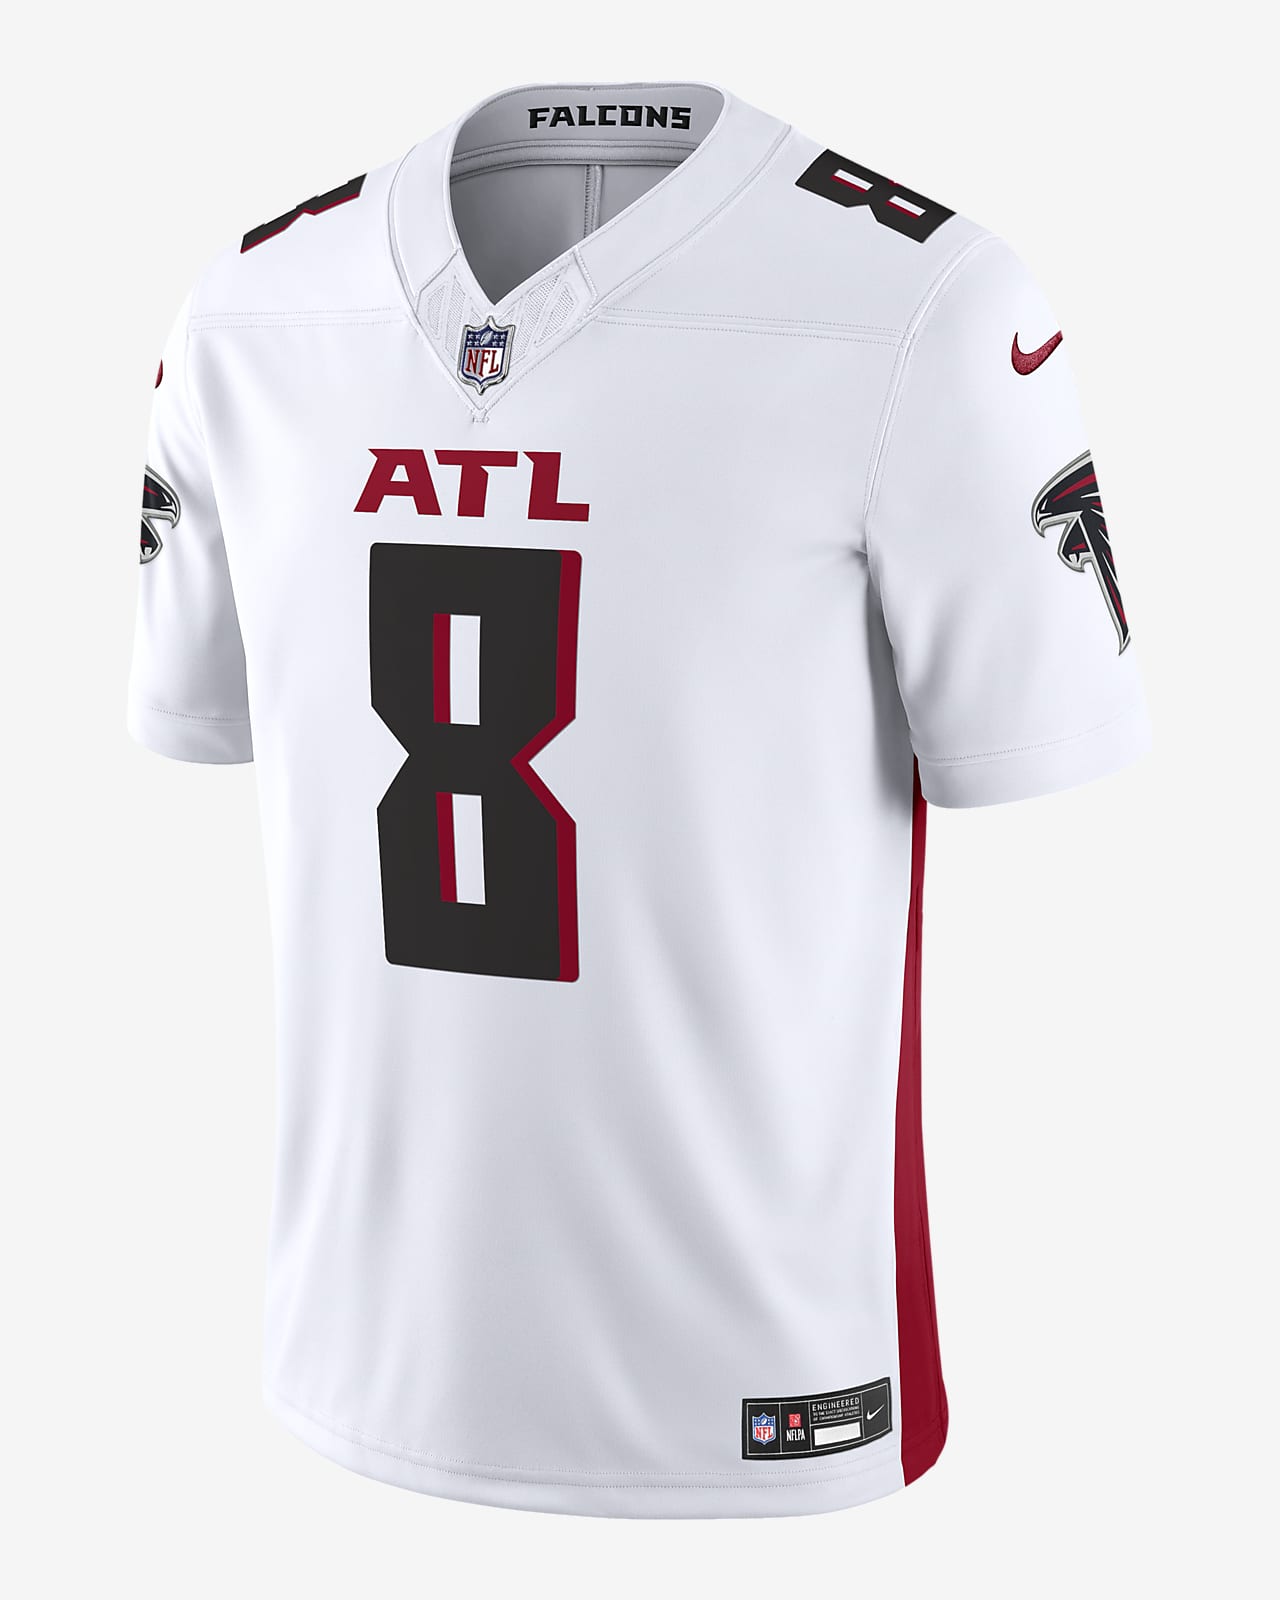 pitts jersey falcons